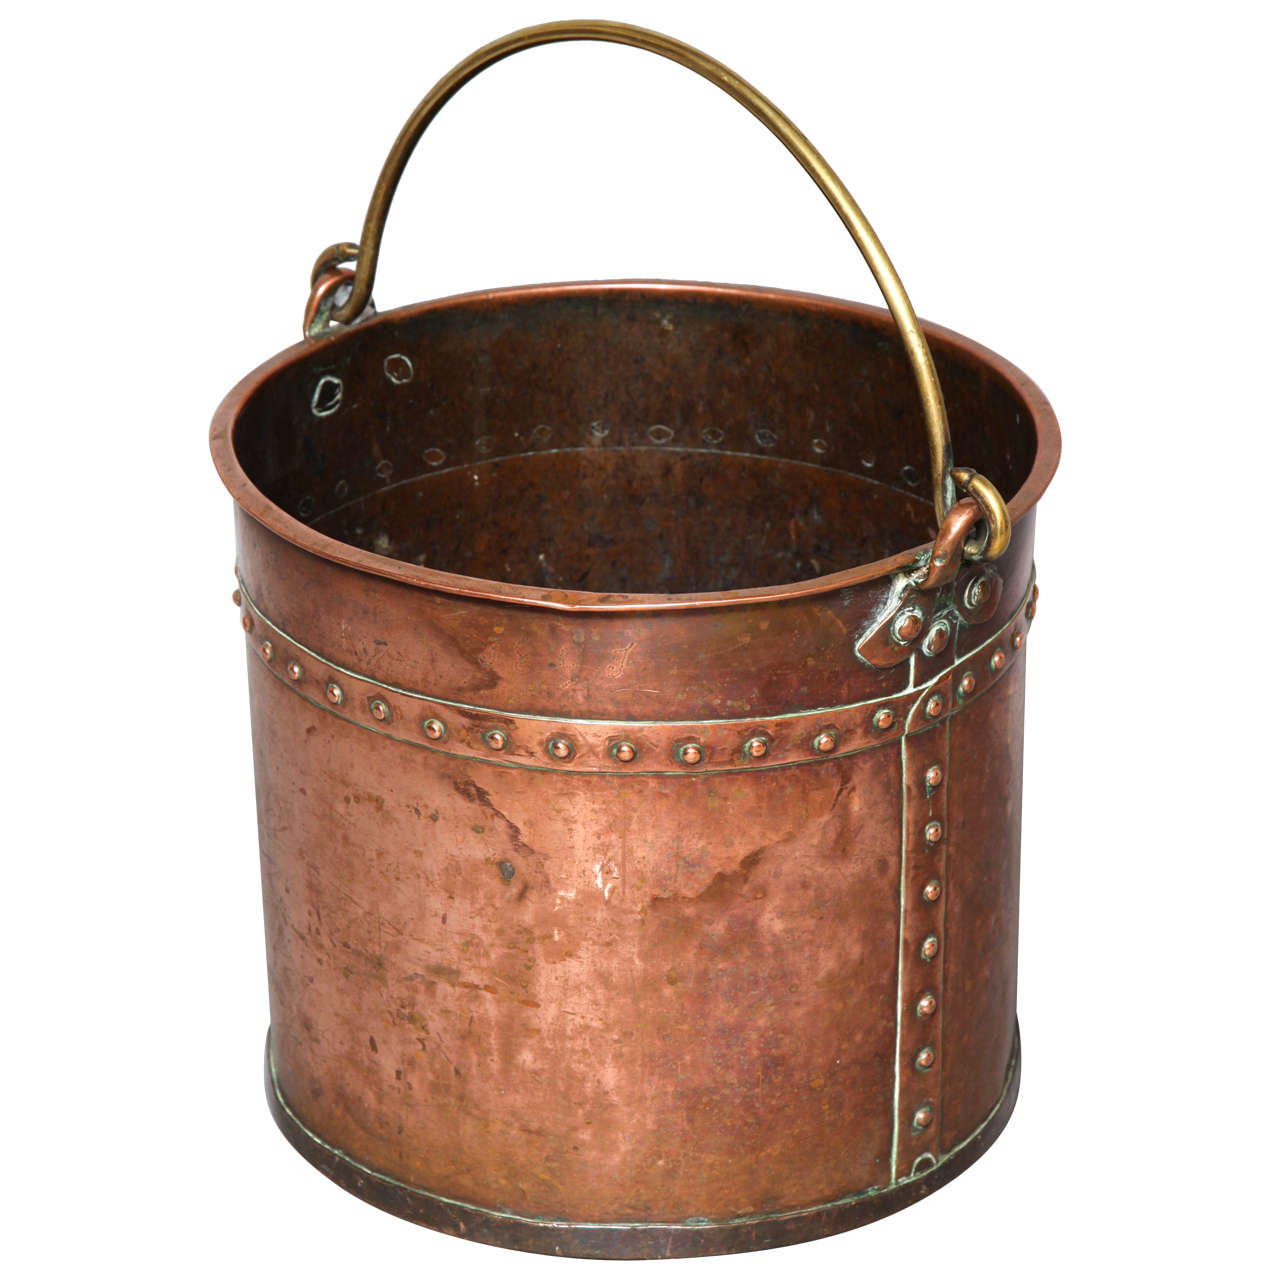 Late 18th Century English Mixed Metal Copper Apple Kettle